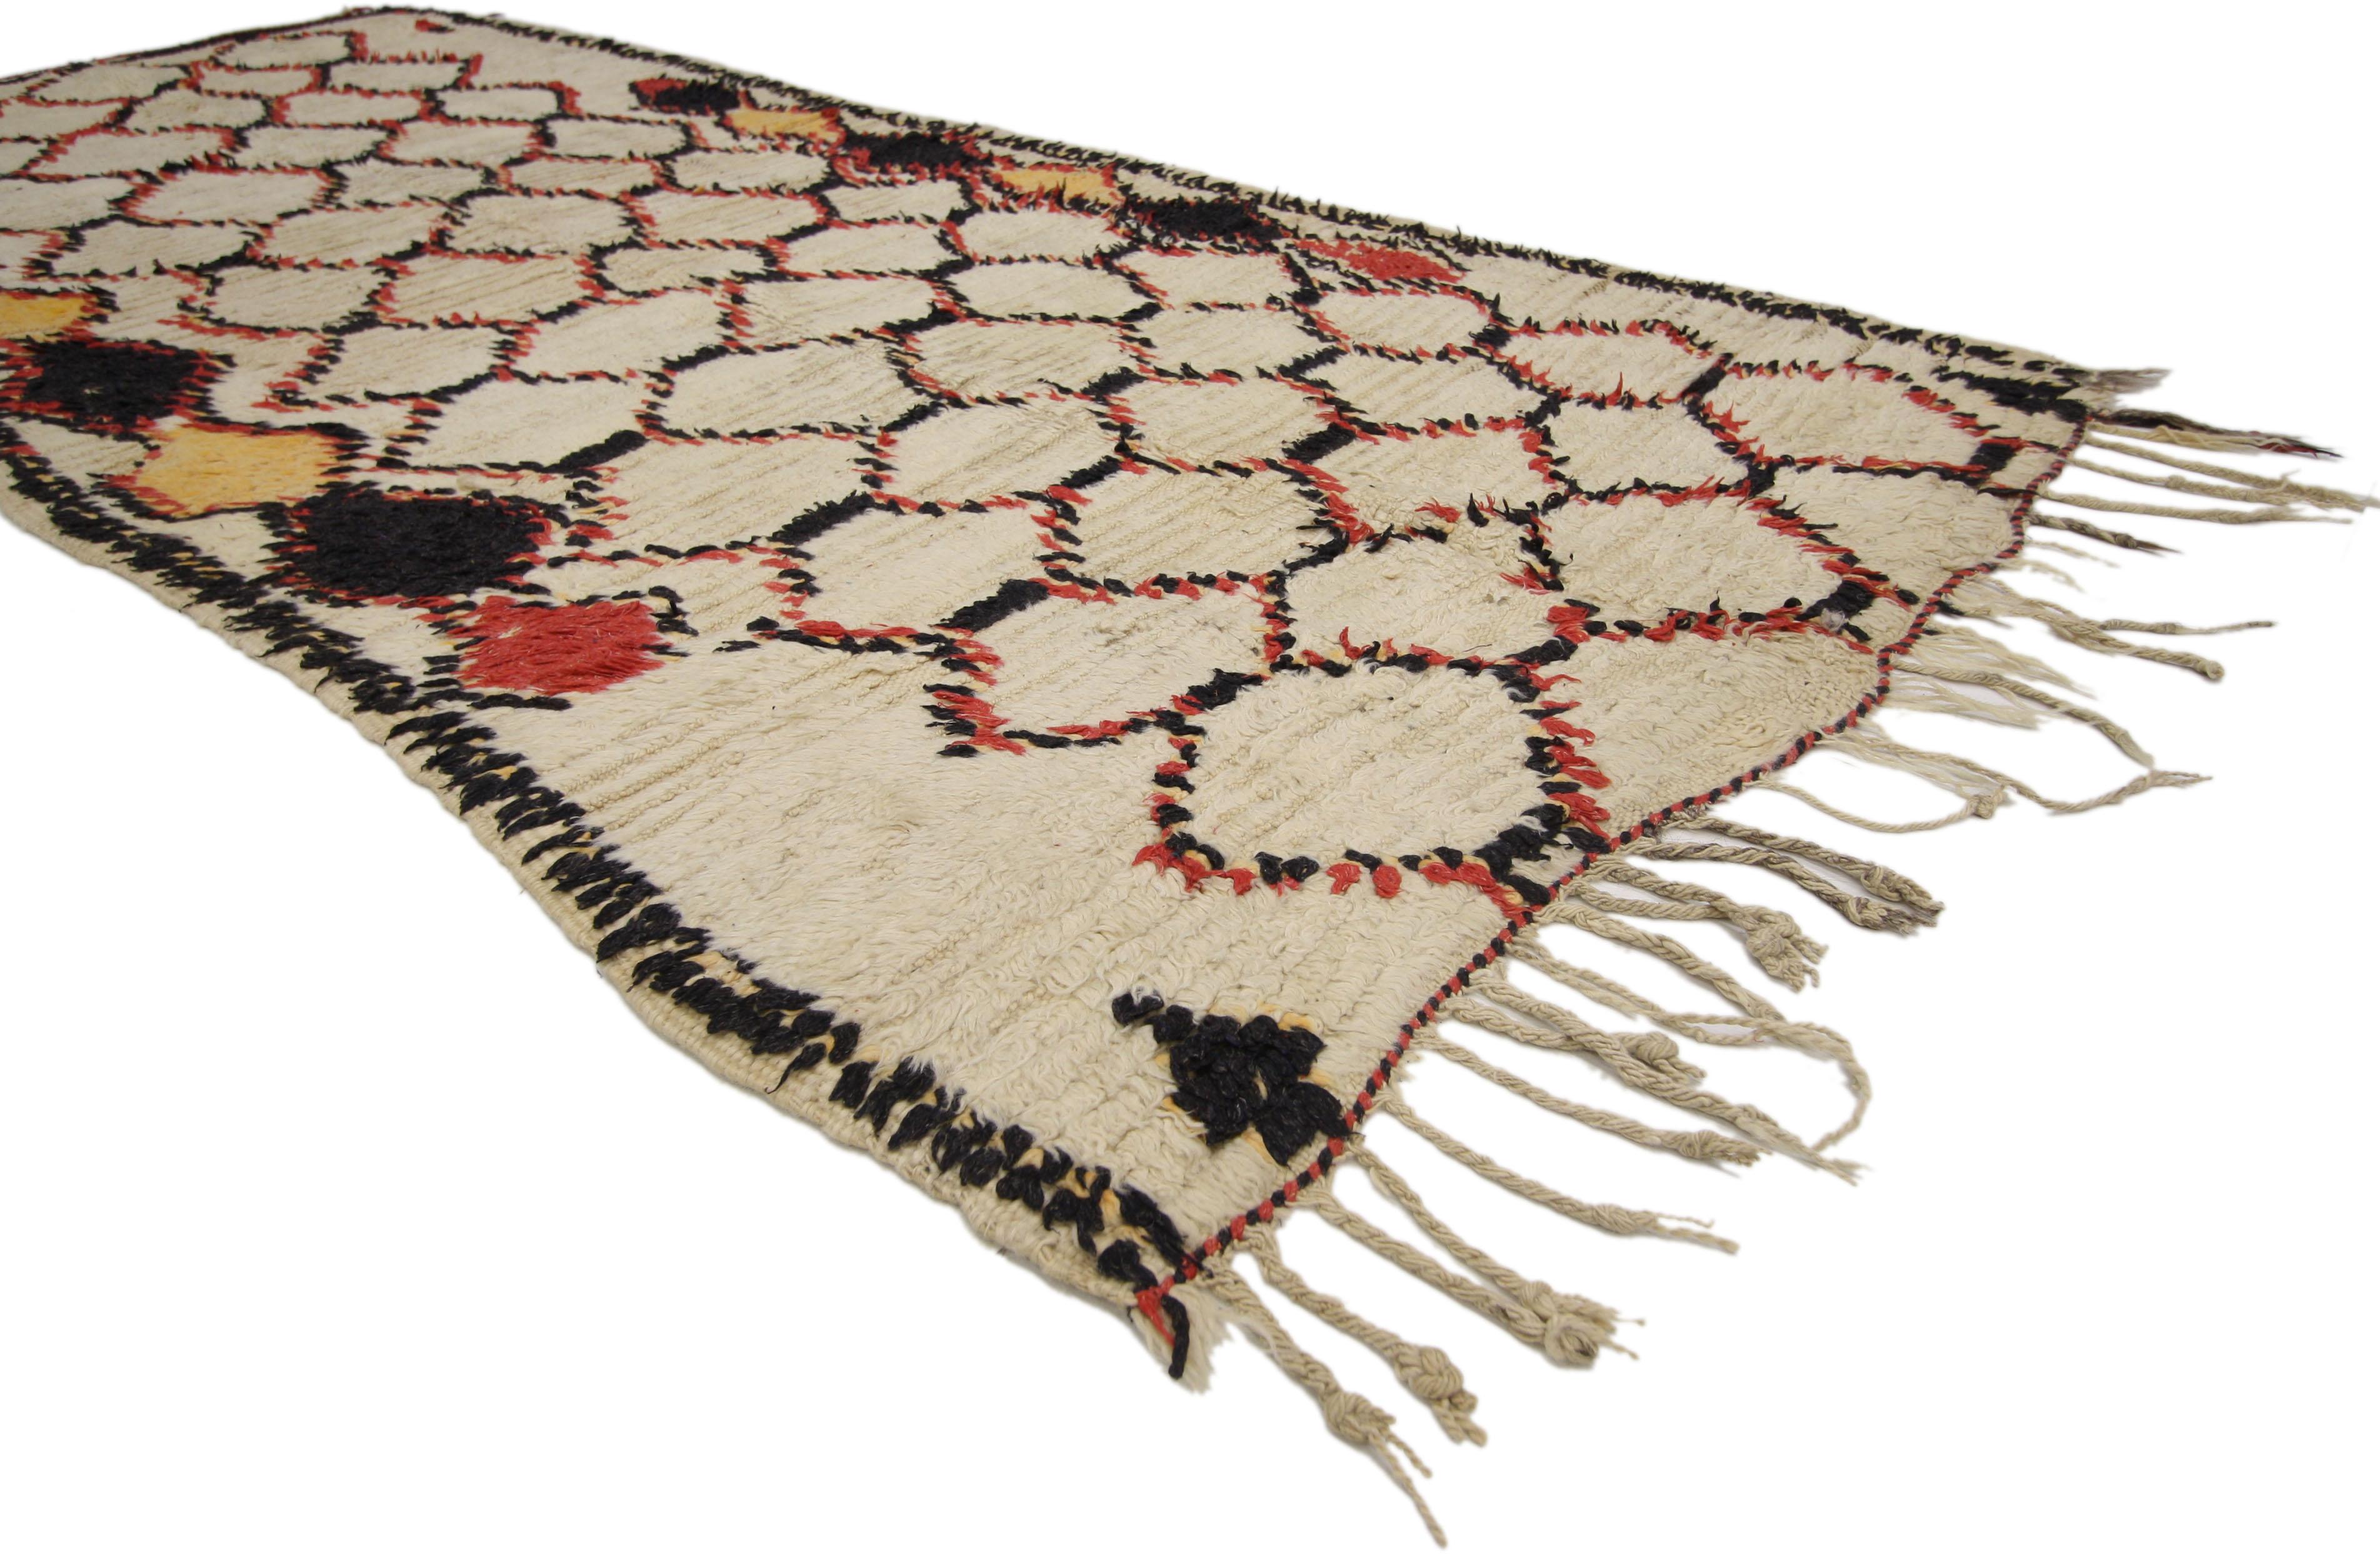 74760, vintage Berber Moroccan Azilal runner with abstract Tribal style, shag hallway runner. This hand knotted wool vintage Berber Moroccan Azilal rug runner features an all-over diamond pattern of asymmetrical lozenges. This Moroccan rug is